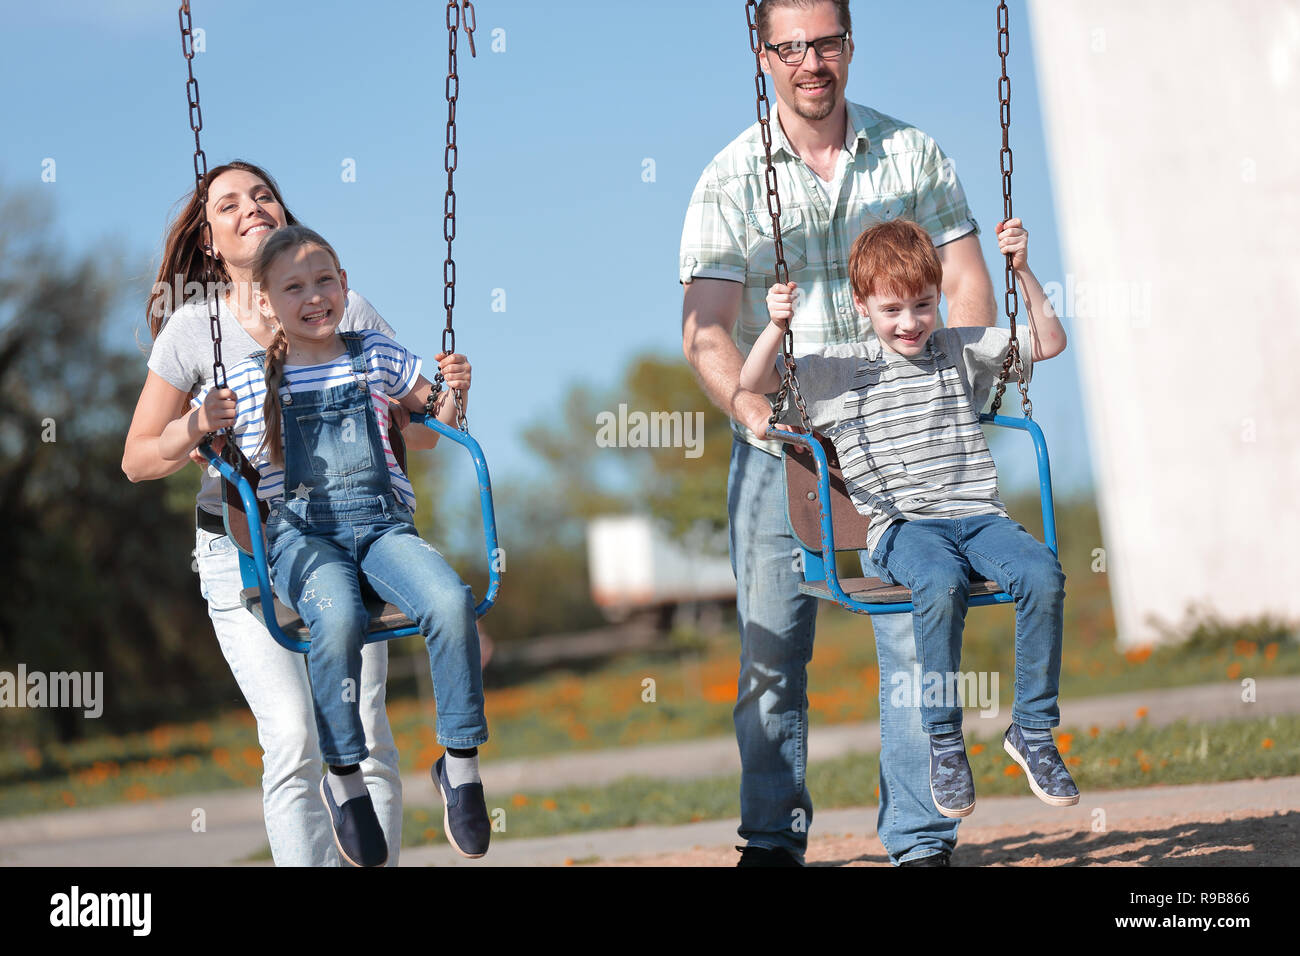 couple with two children playing in the Playground Stock Photo